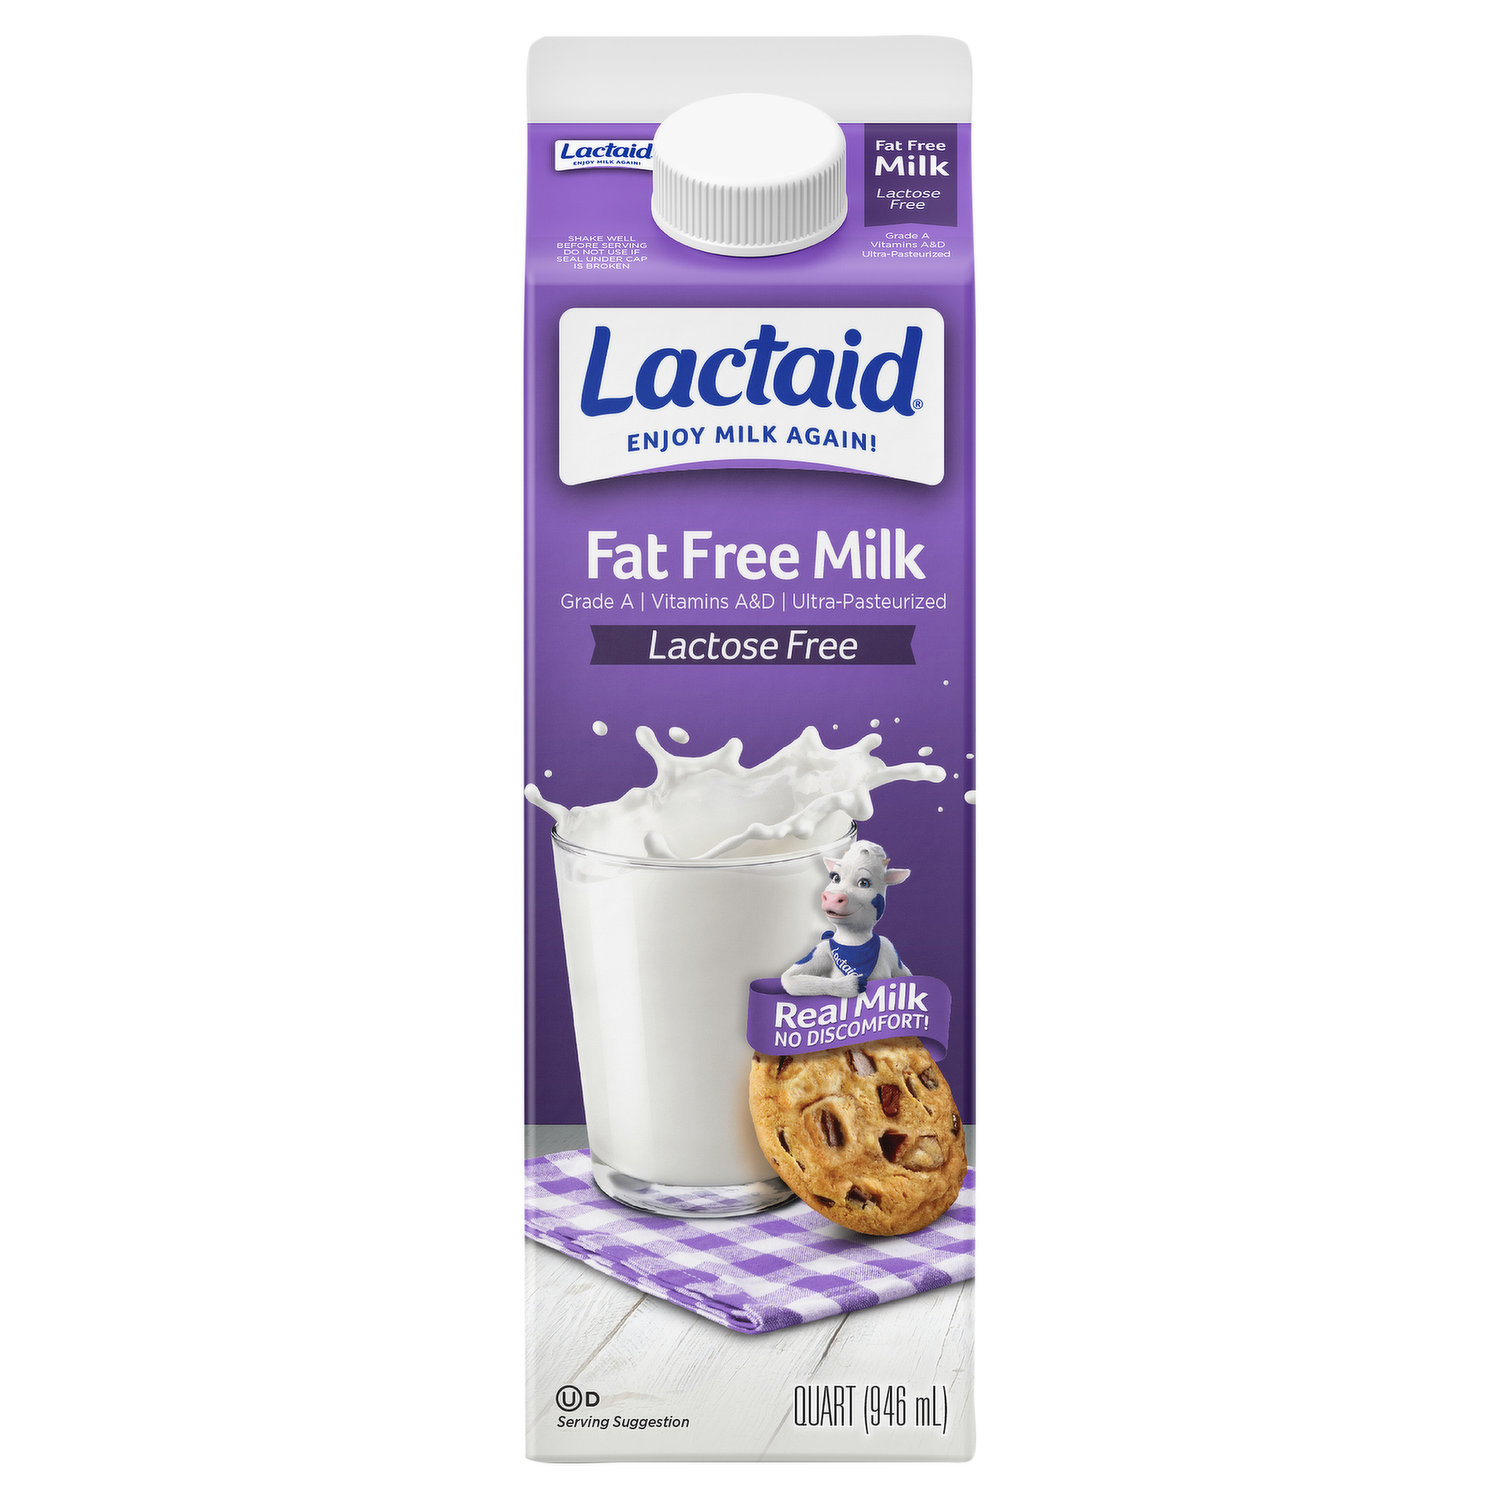 Nutriben Lactose Free Milk From Day One 400g